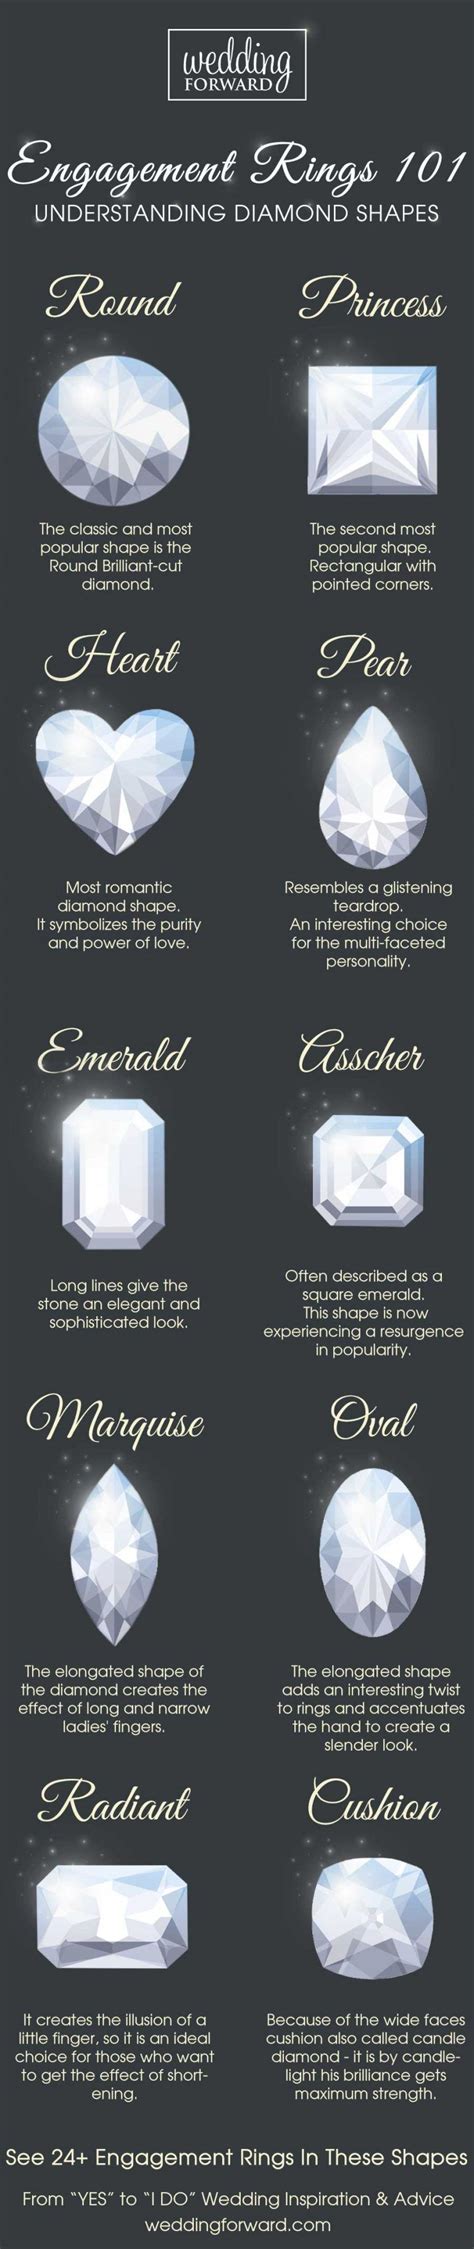 Complete Visual Guide To Engagement Rings Wedding Forward